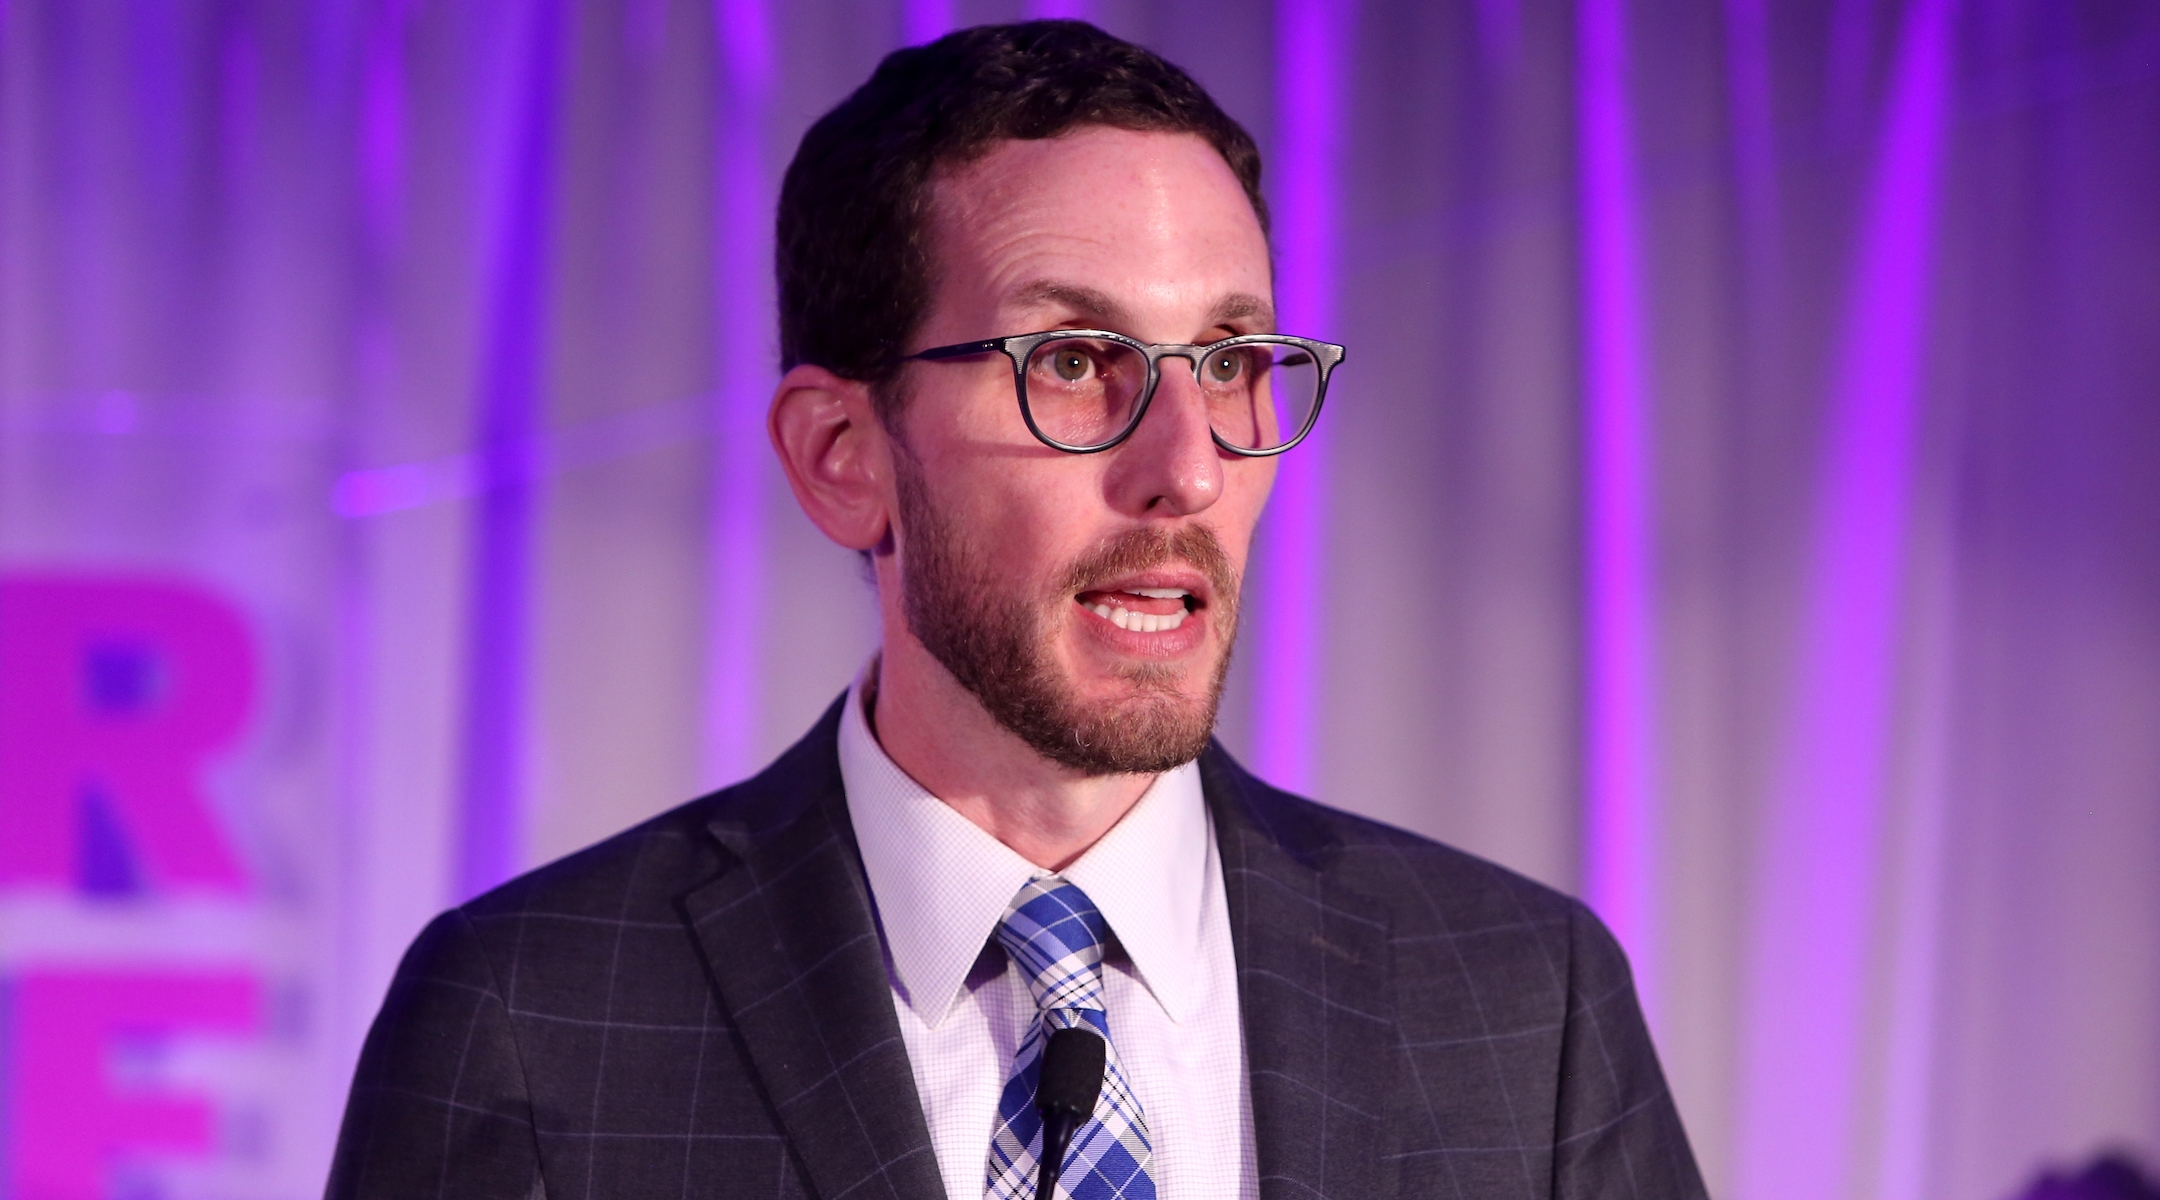 California State Sen. Scott Wiener speaks at the Lambda Legal West Coast Liberty Awards in Beverly Hills, California in 2018. (Randy Shropshire/Getty Images)